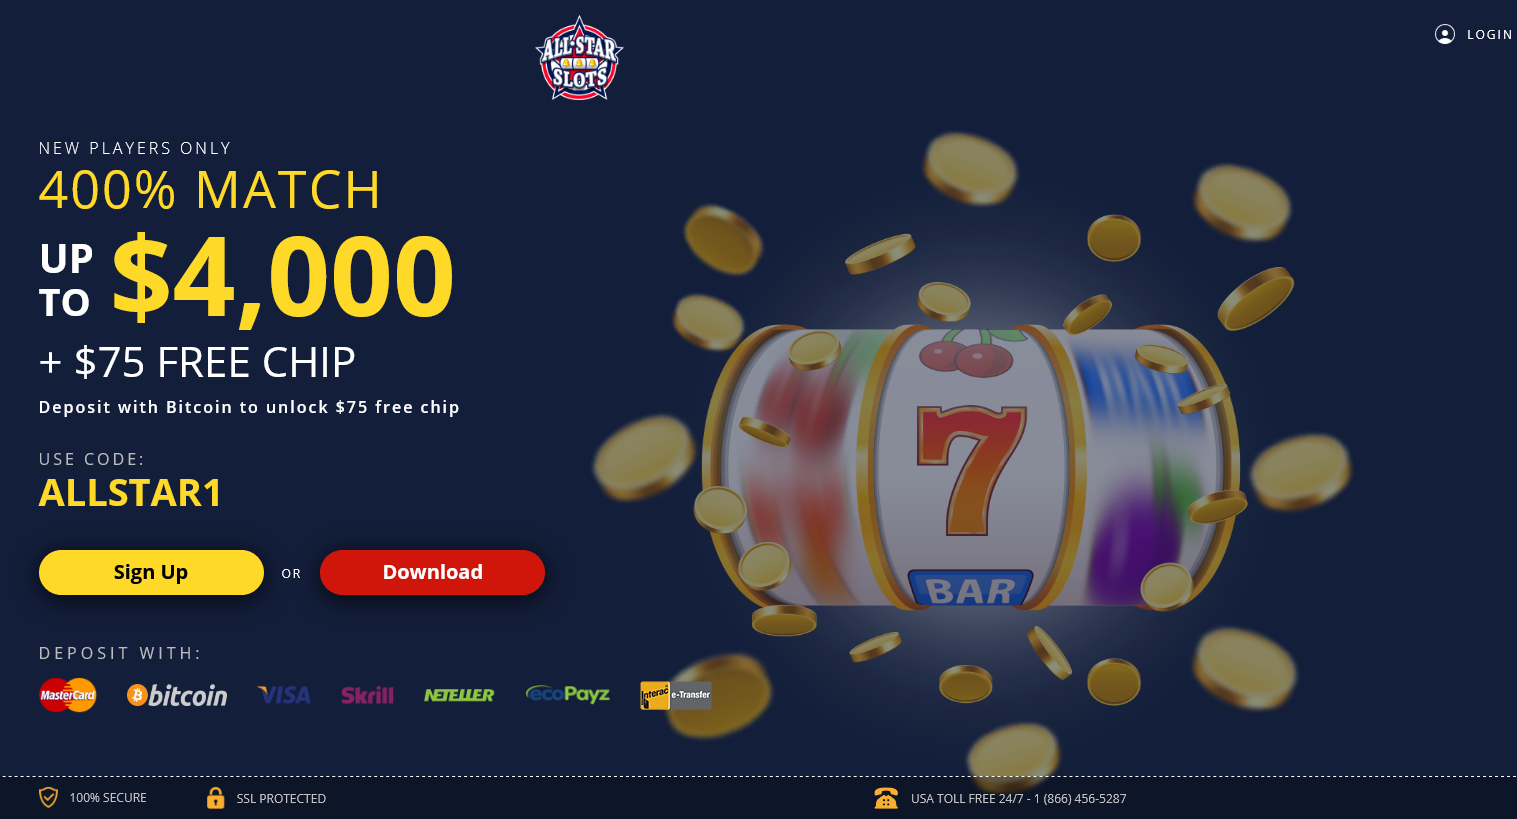 NEW PLAYERS
                                ONLY 400% MATCH UP TO $4,000 + $75 FREE
                                CHIP Deposit with Bitcoin to unlock $75
                                free chip